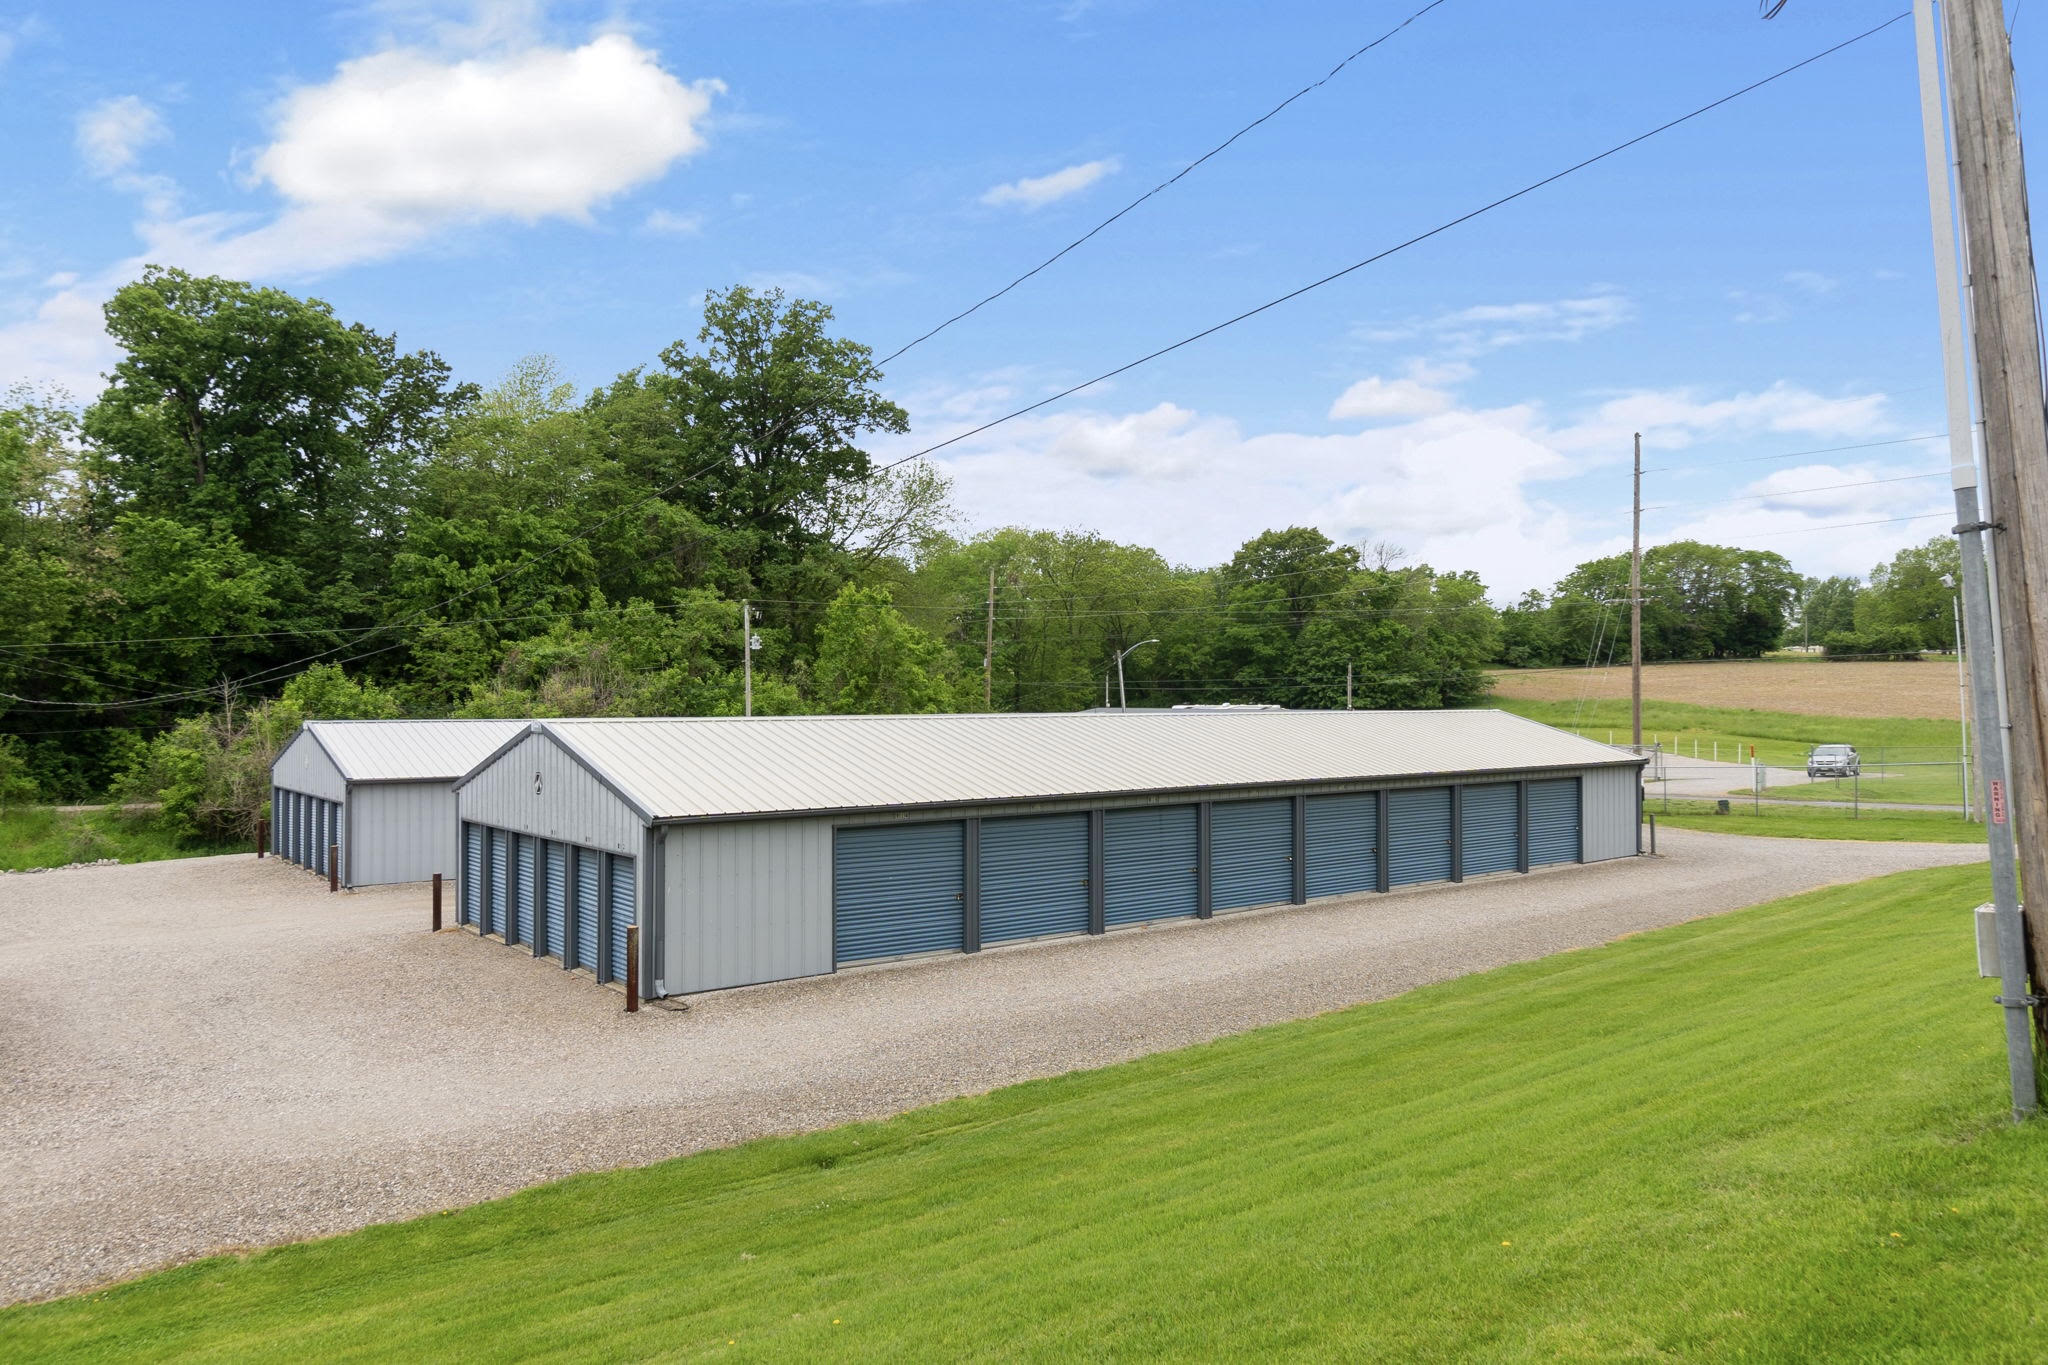 Secure, Safe and Gated Storage Facility with 24-hour Security Cameras in Chester, IL